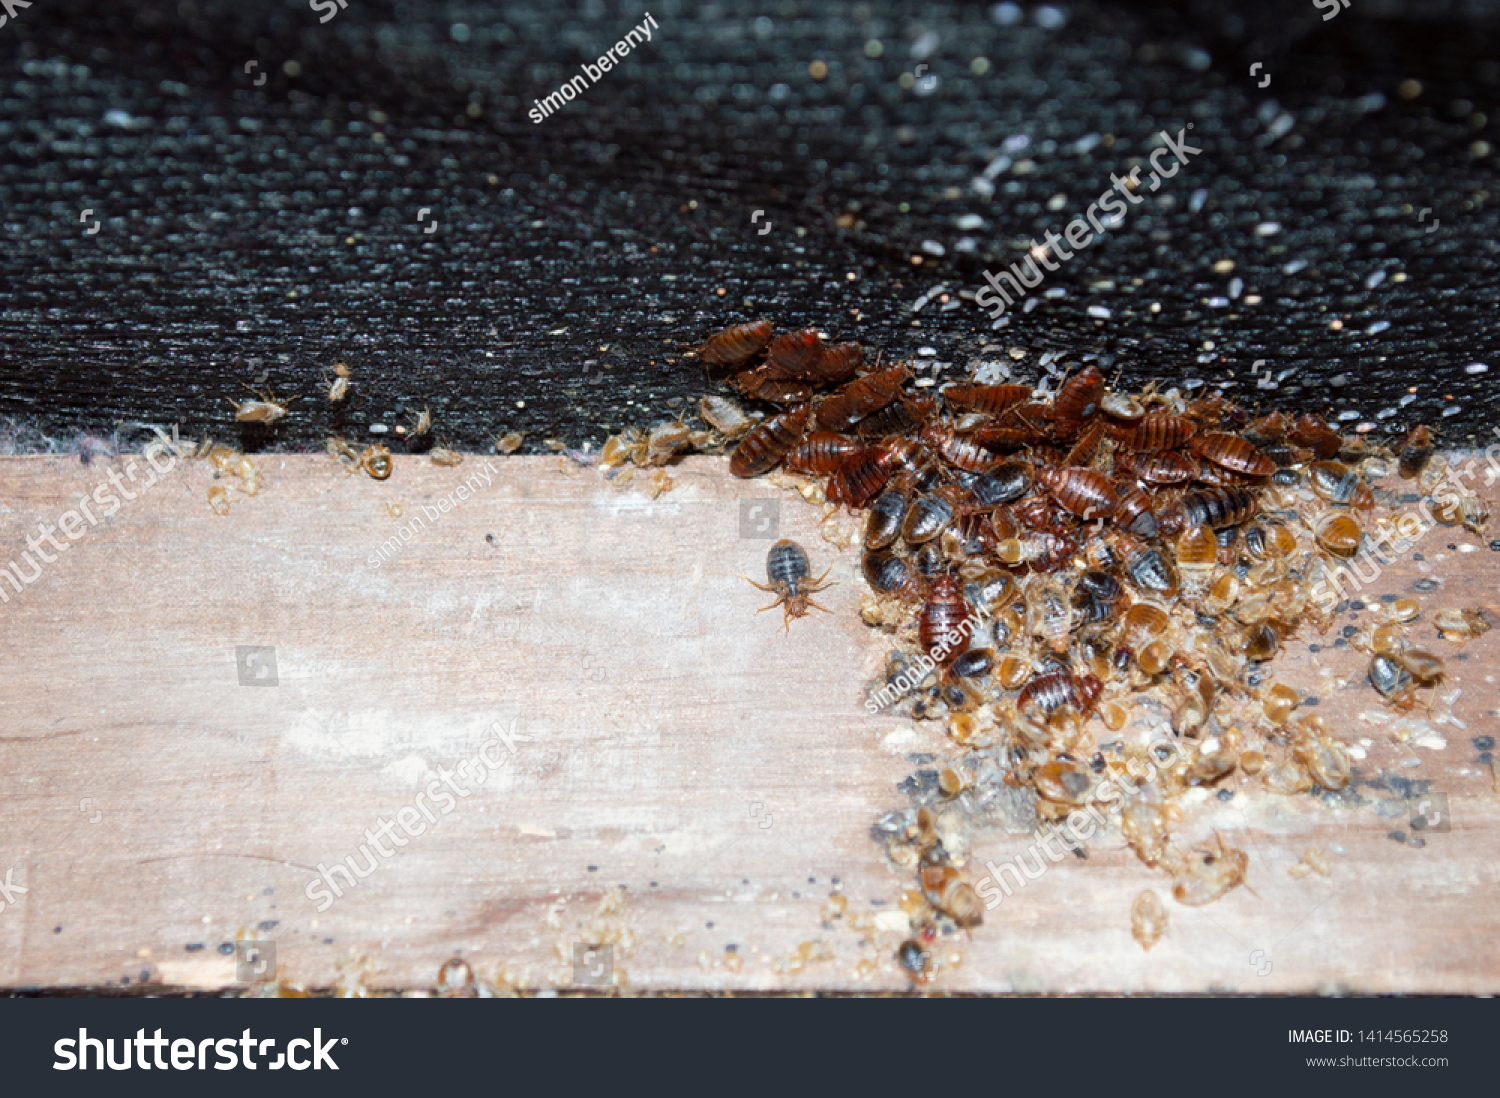 Cimex lectularius or bedbugs infest a wooden bed frame in city centre apartment building while being revealed by a pest control professional prior to treatment with pesticides. #1414565258